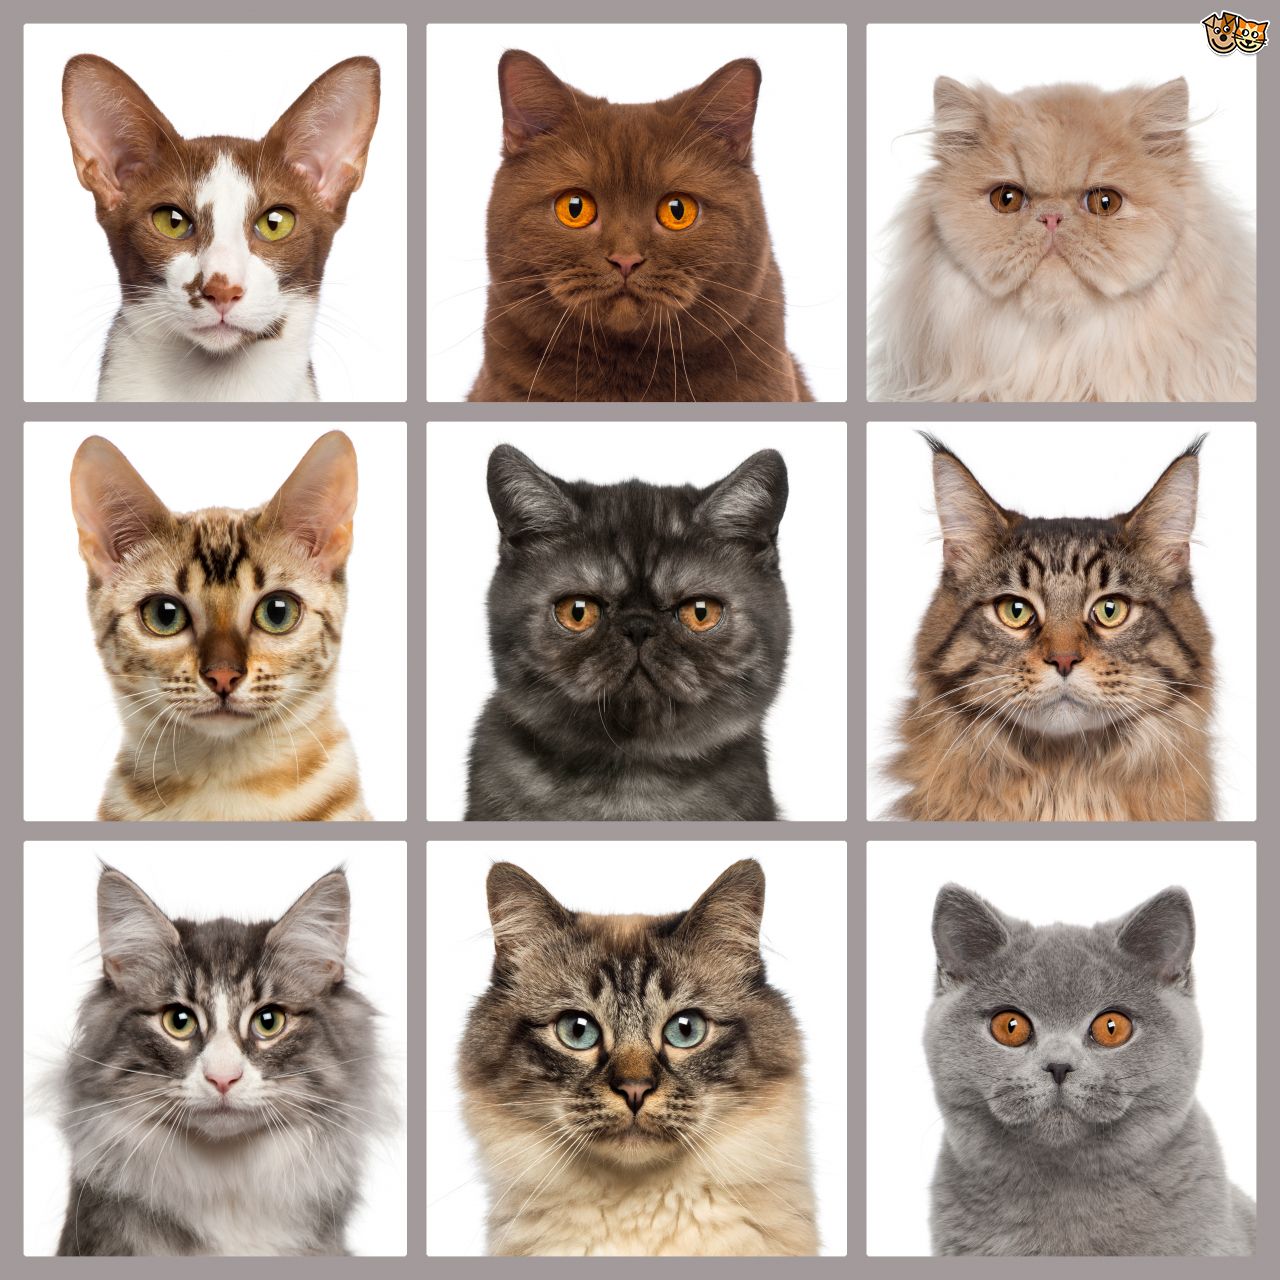 Cat Breeds: How Can I Identify My Cat's Breed?